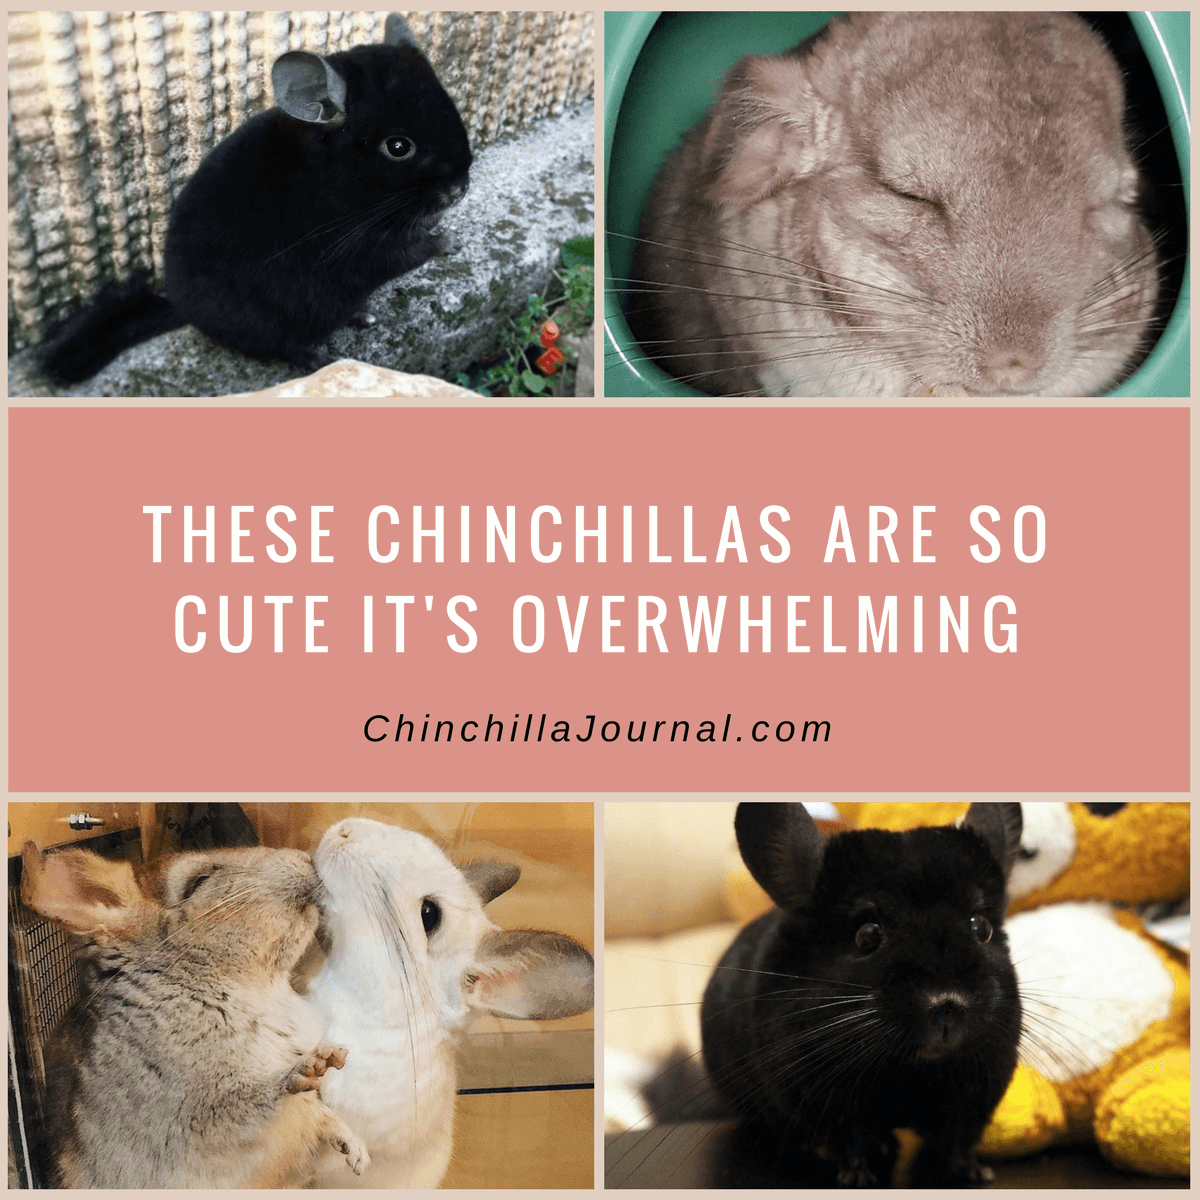 These Chinchillas Are So Cute It's Overwhelming